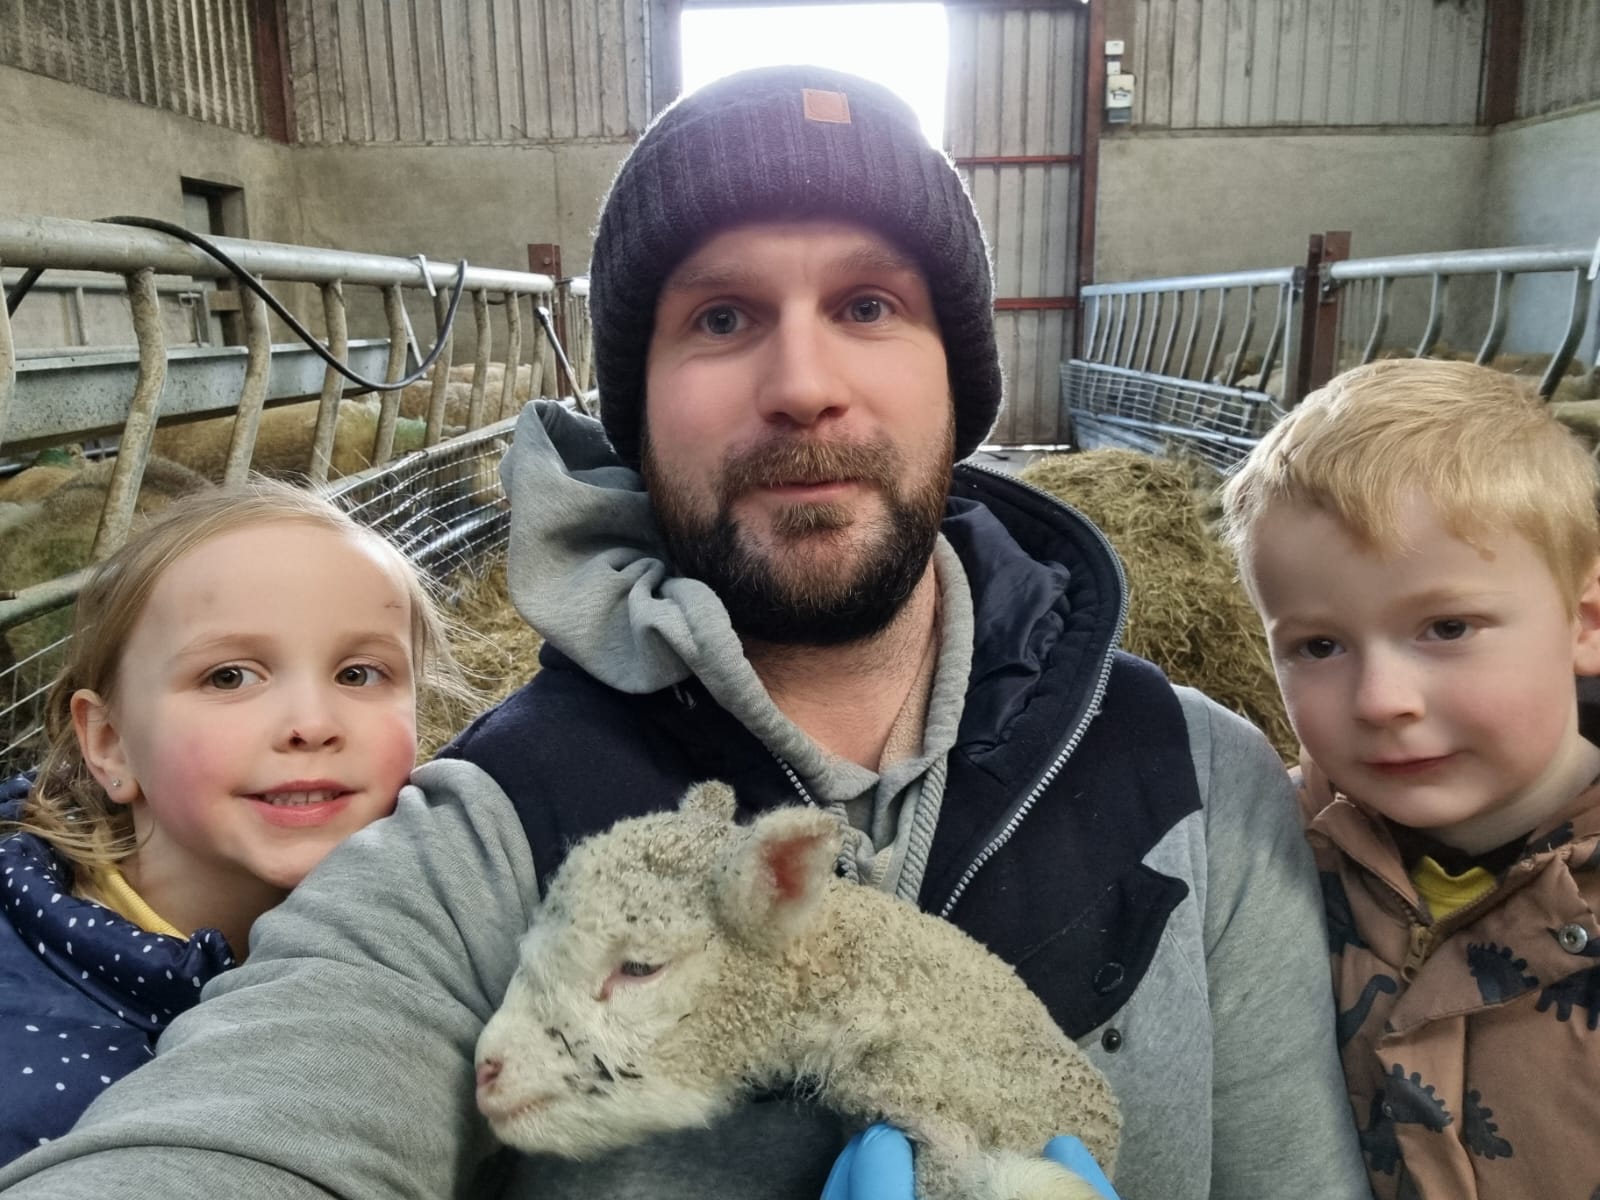 Sheep farmer with lamb and children